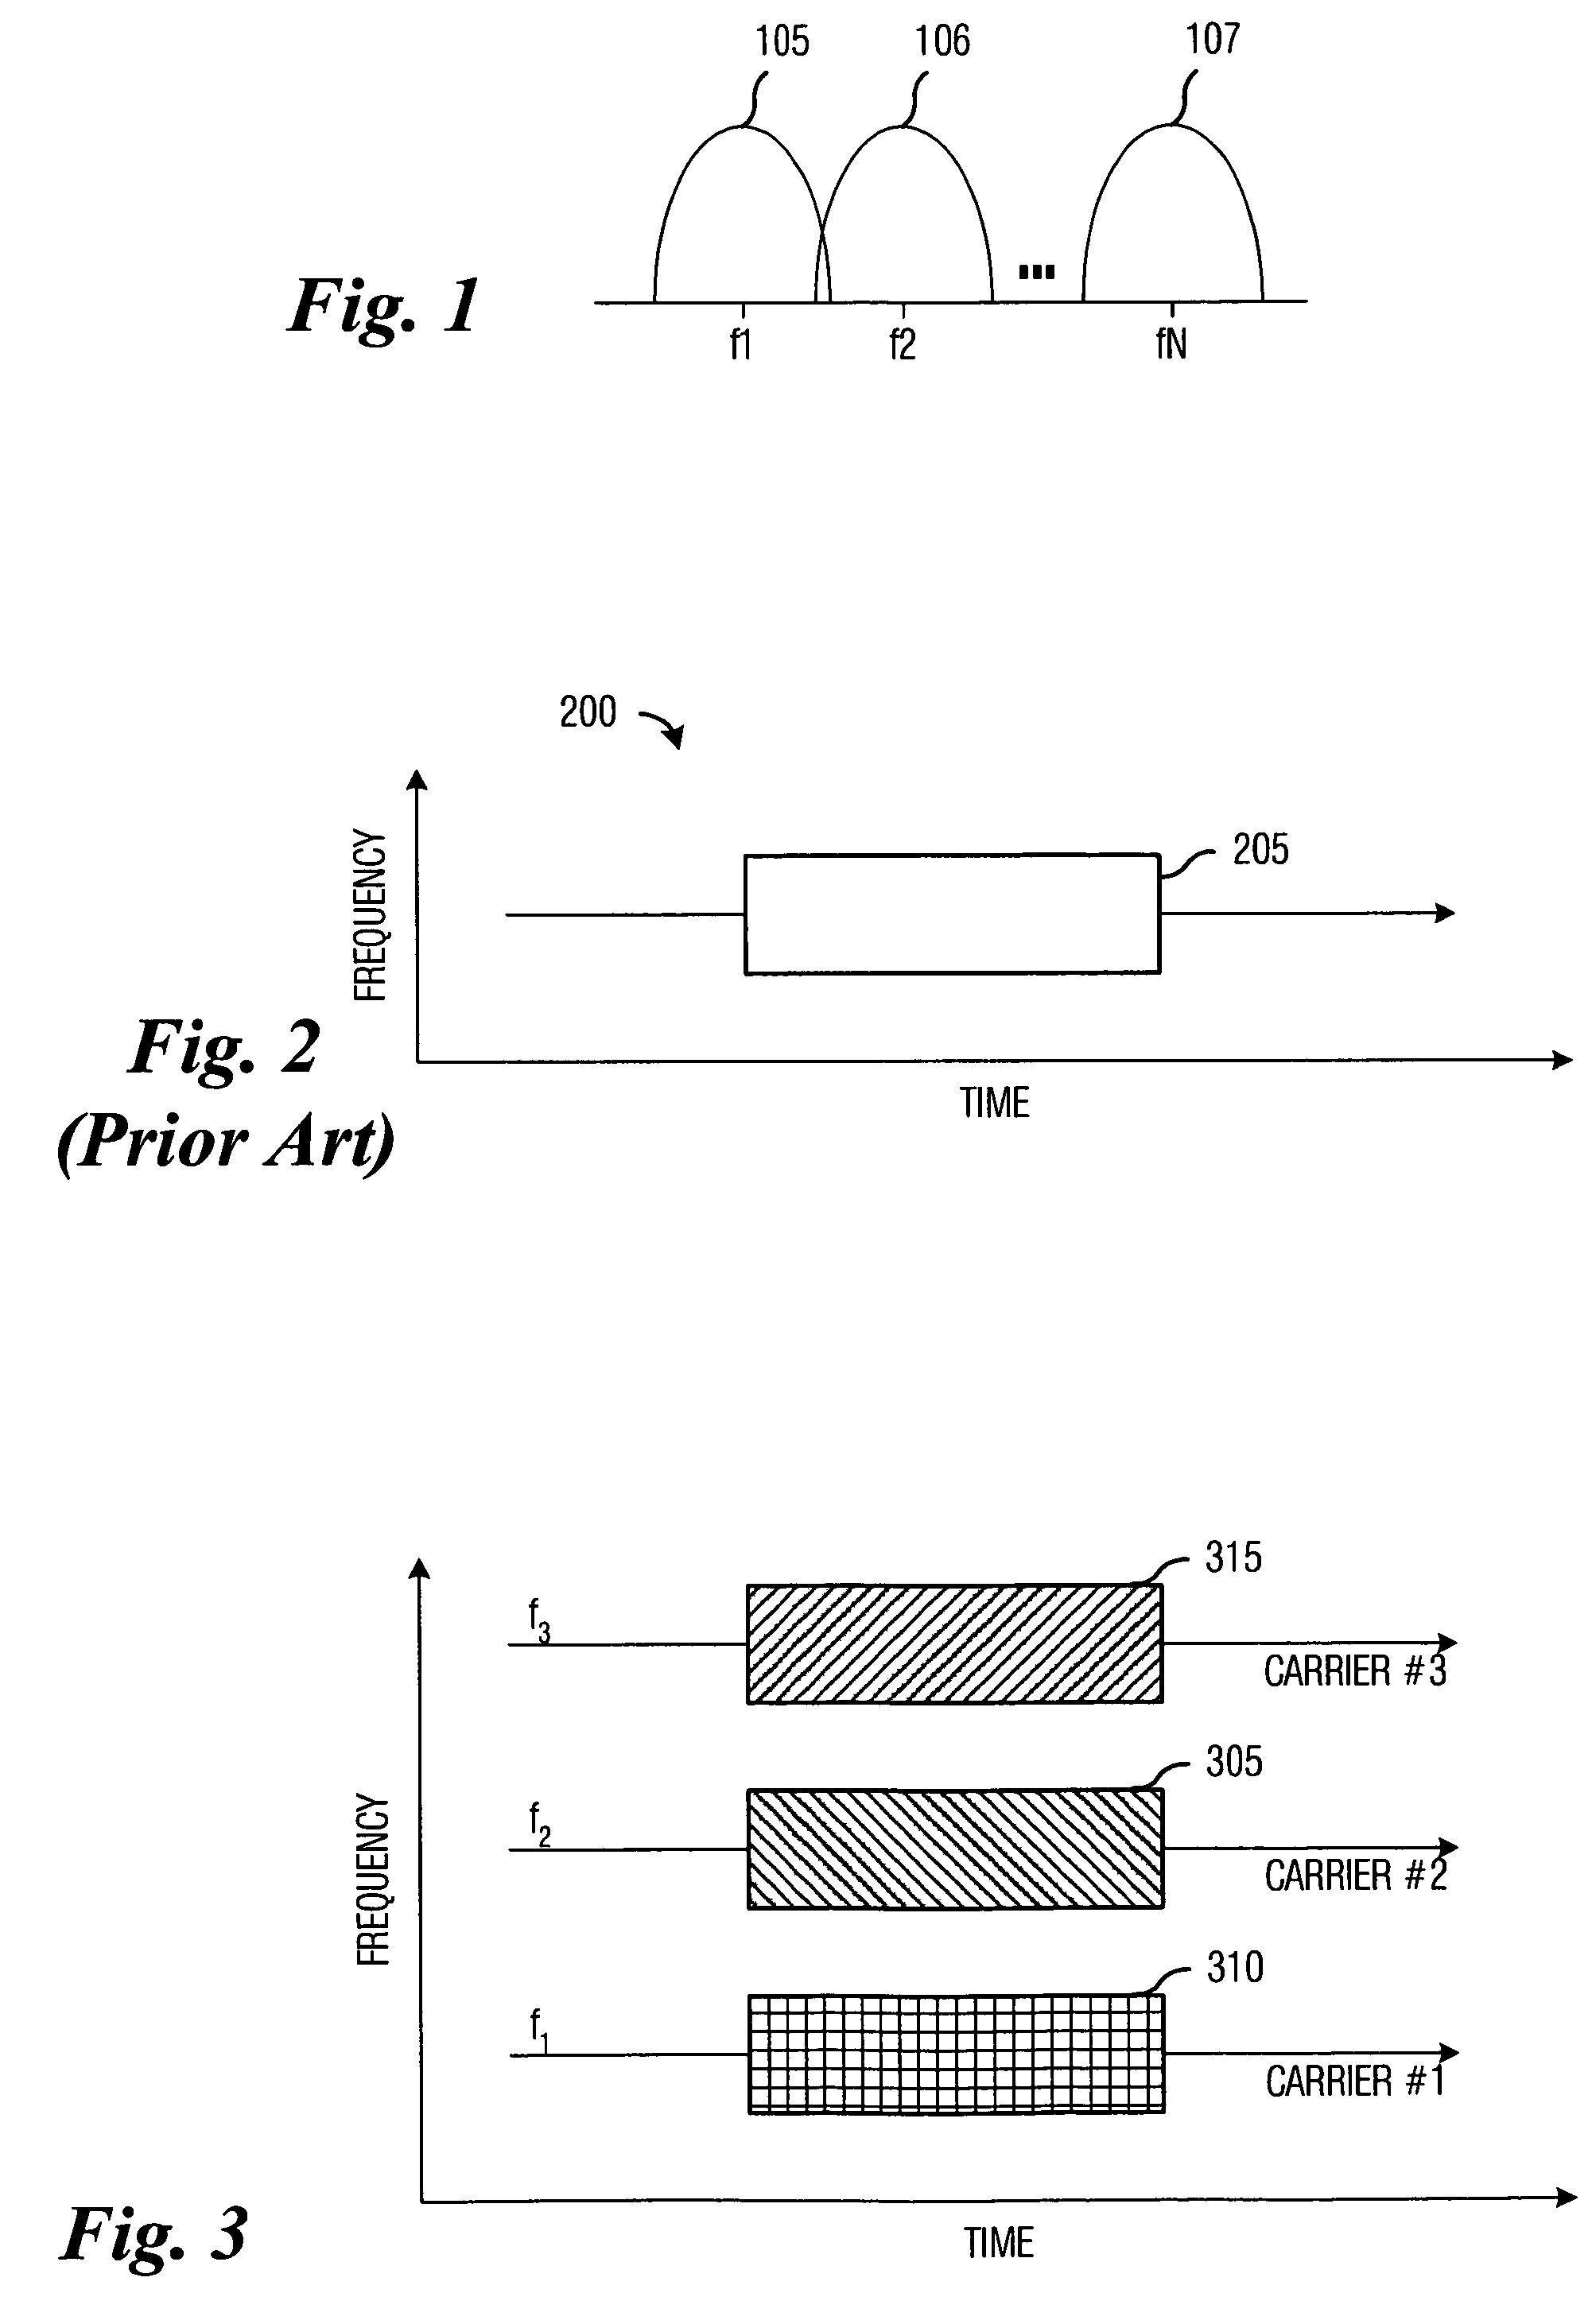 Downlink signaling for a multi-carrier communications system